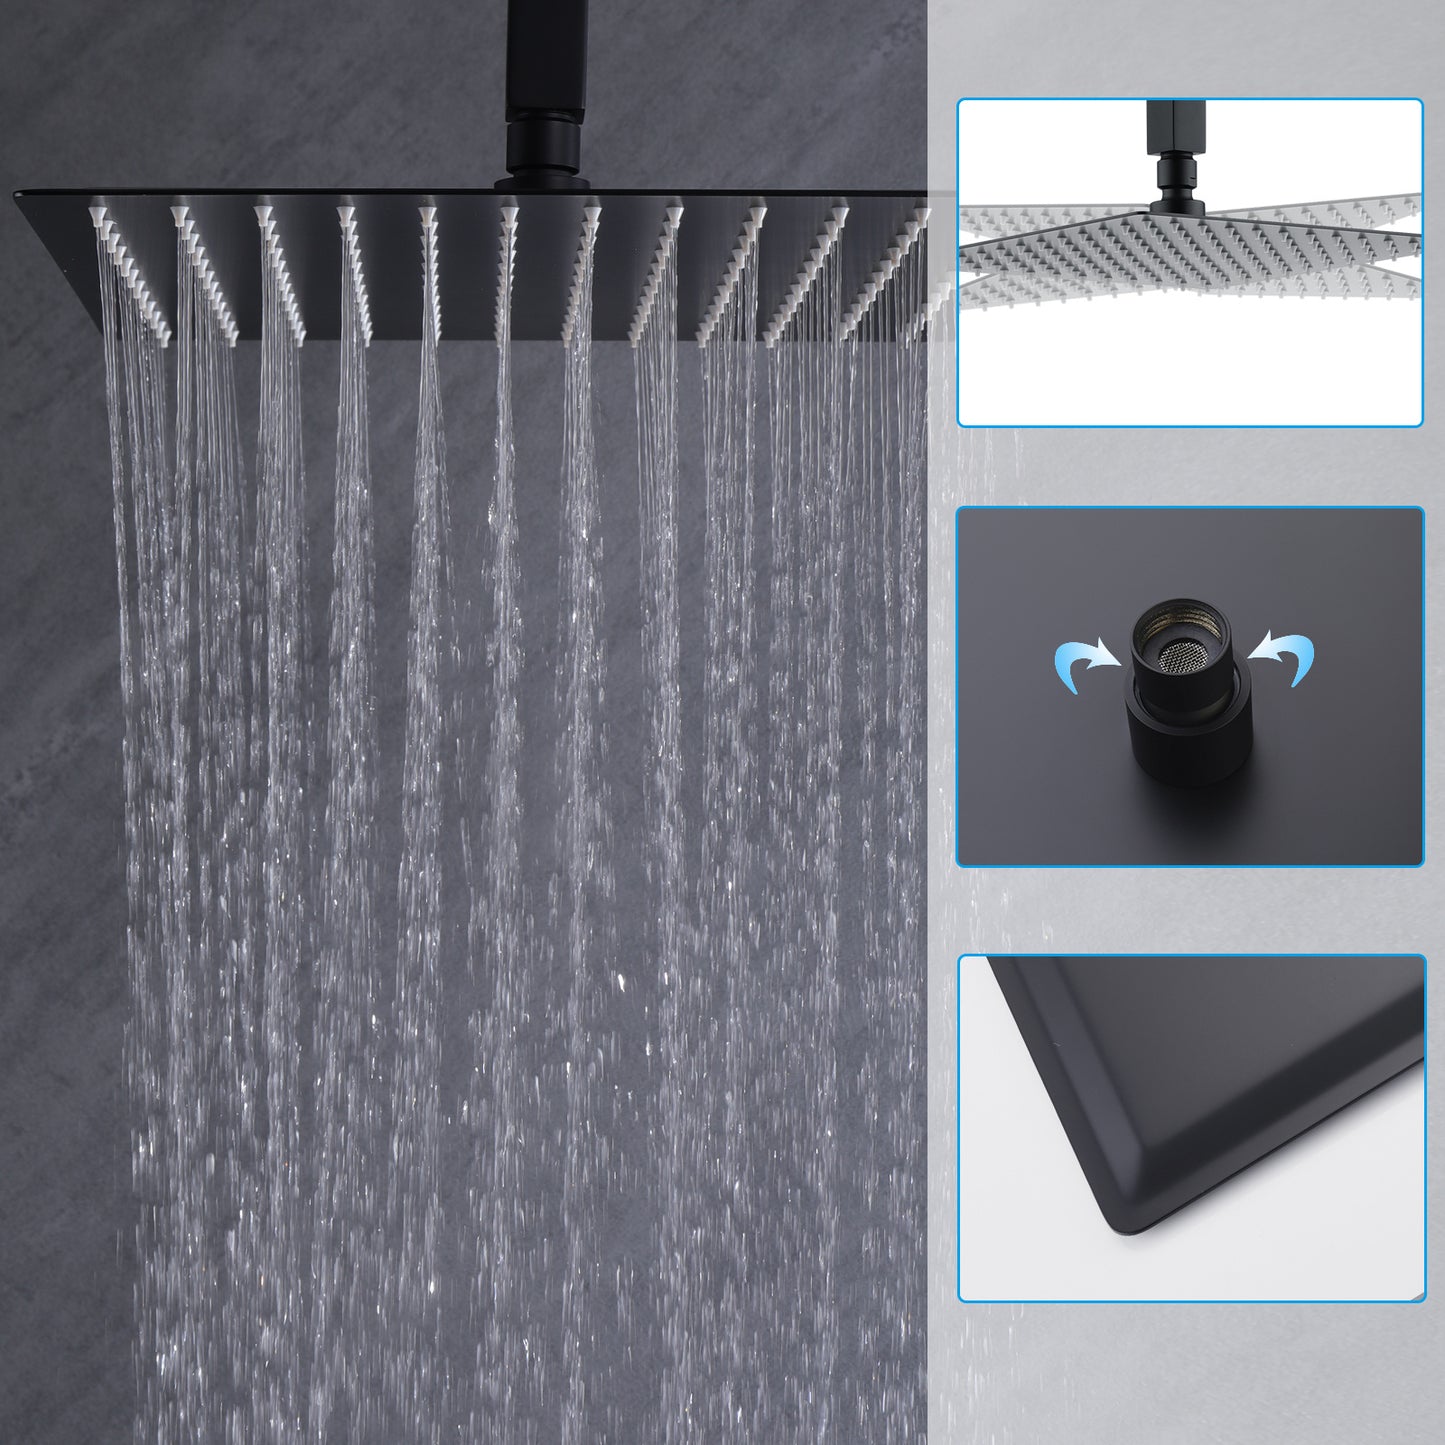 Matte Black 12 inches Rain Shower Faucet Sets with Waterfall Tub Spout and Handheld Shower Head